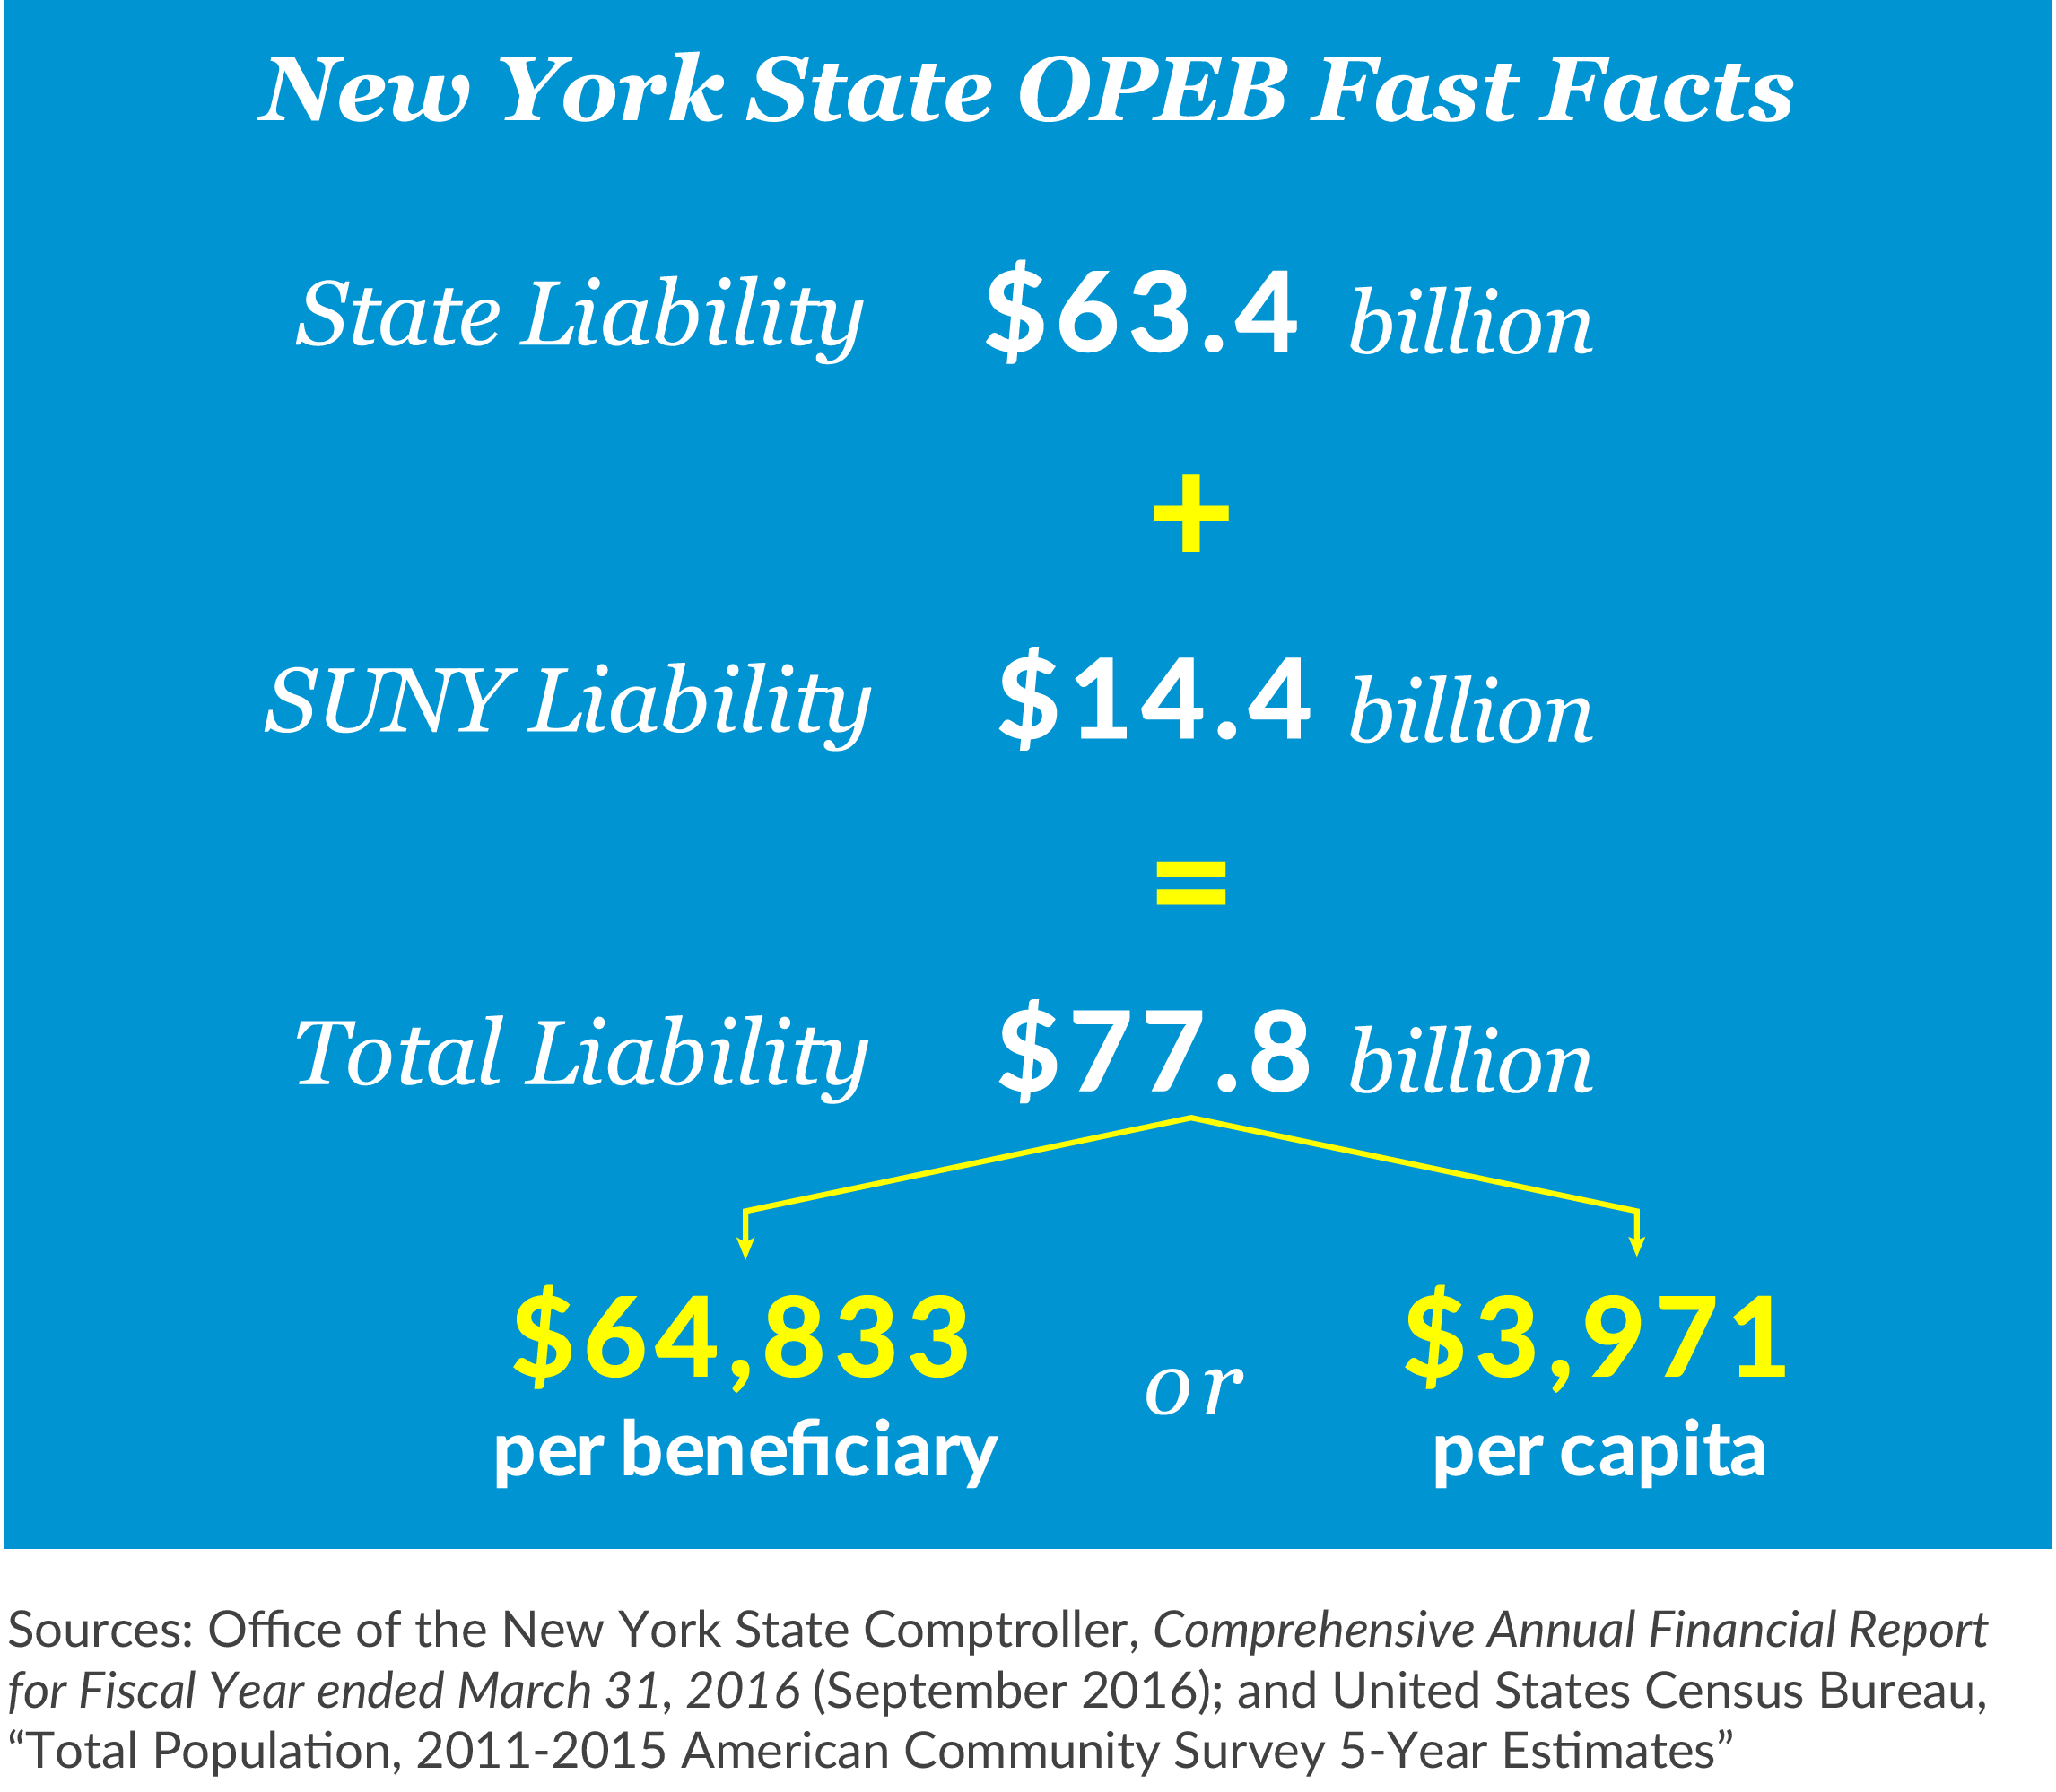 New York State OPEB Fast Facts